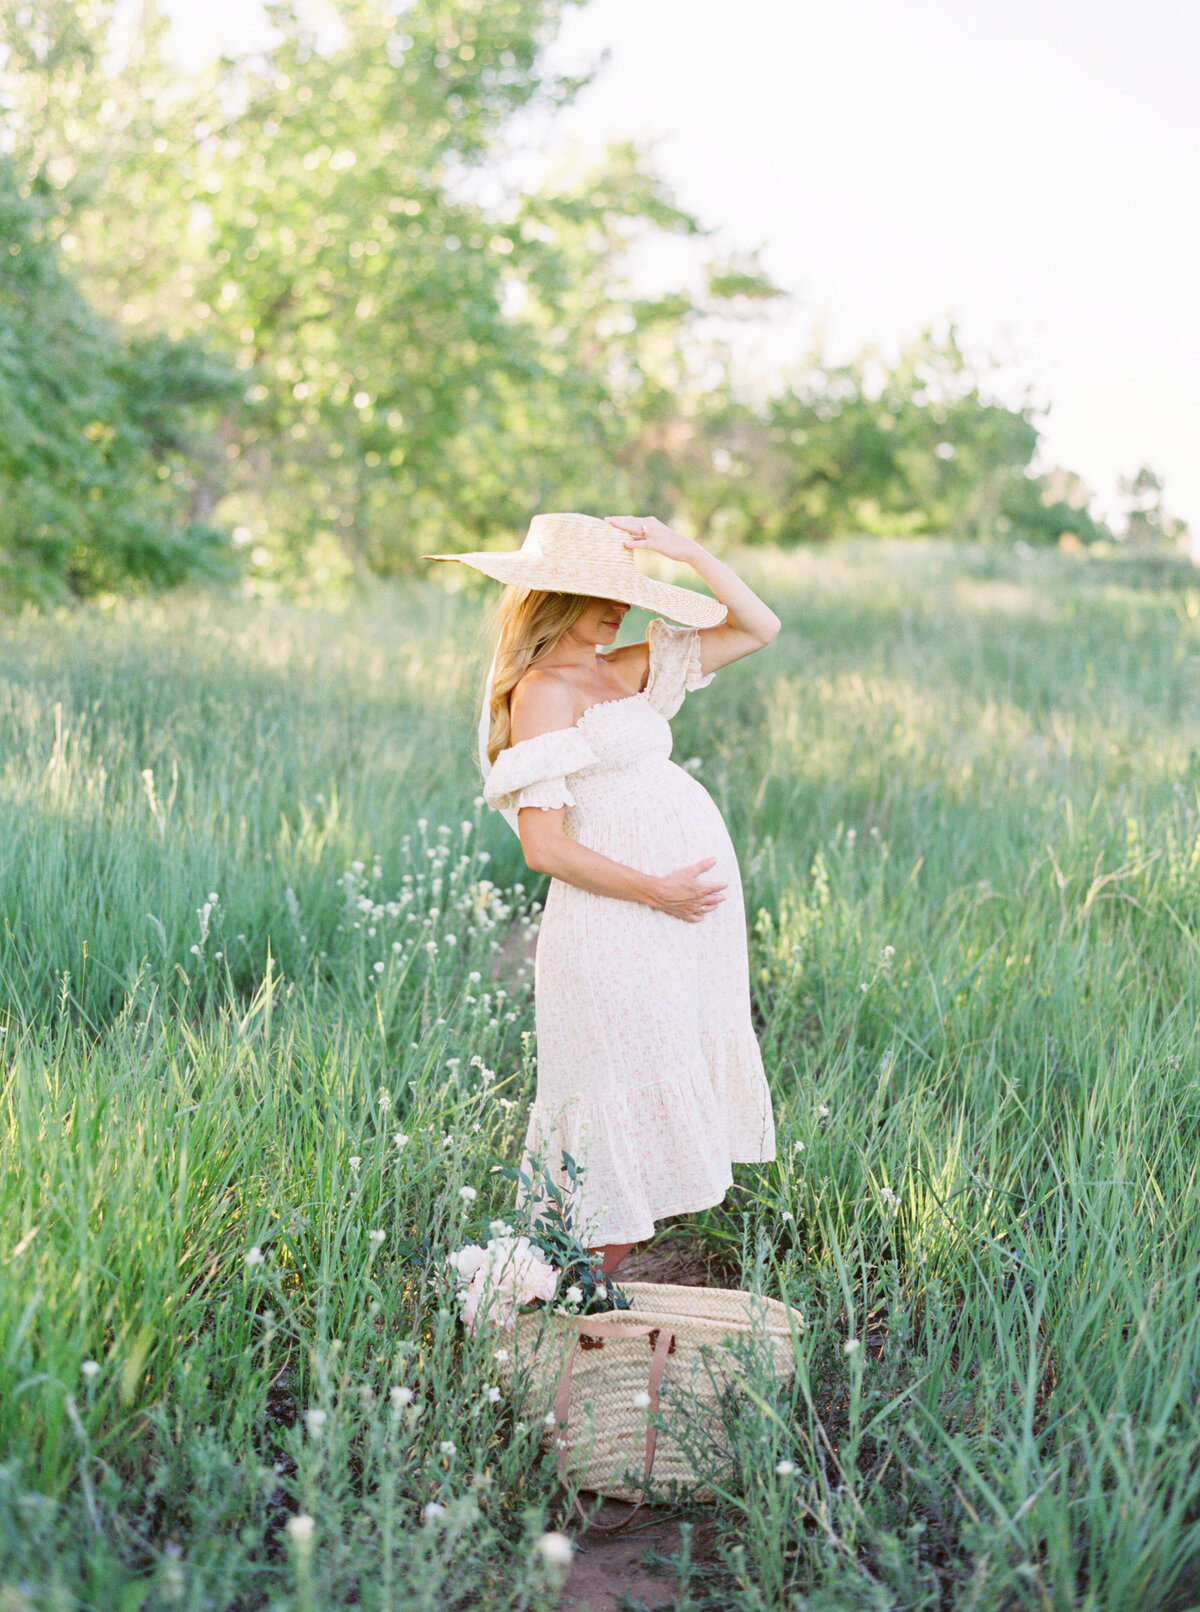 Denver Photographr featruing Maternity photoshoot in a field.